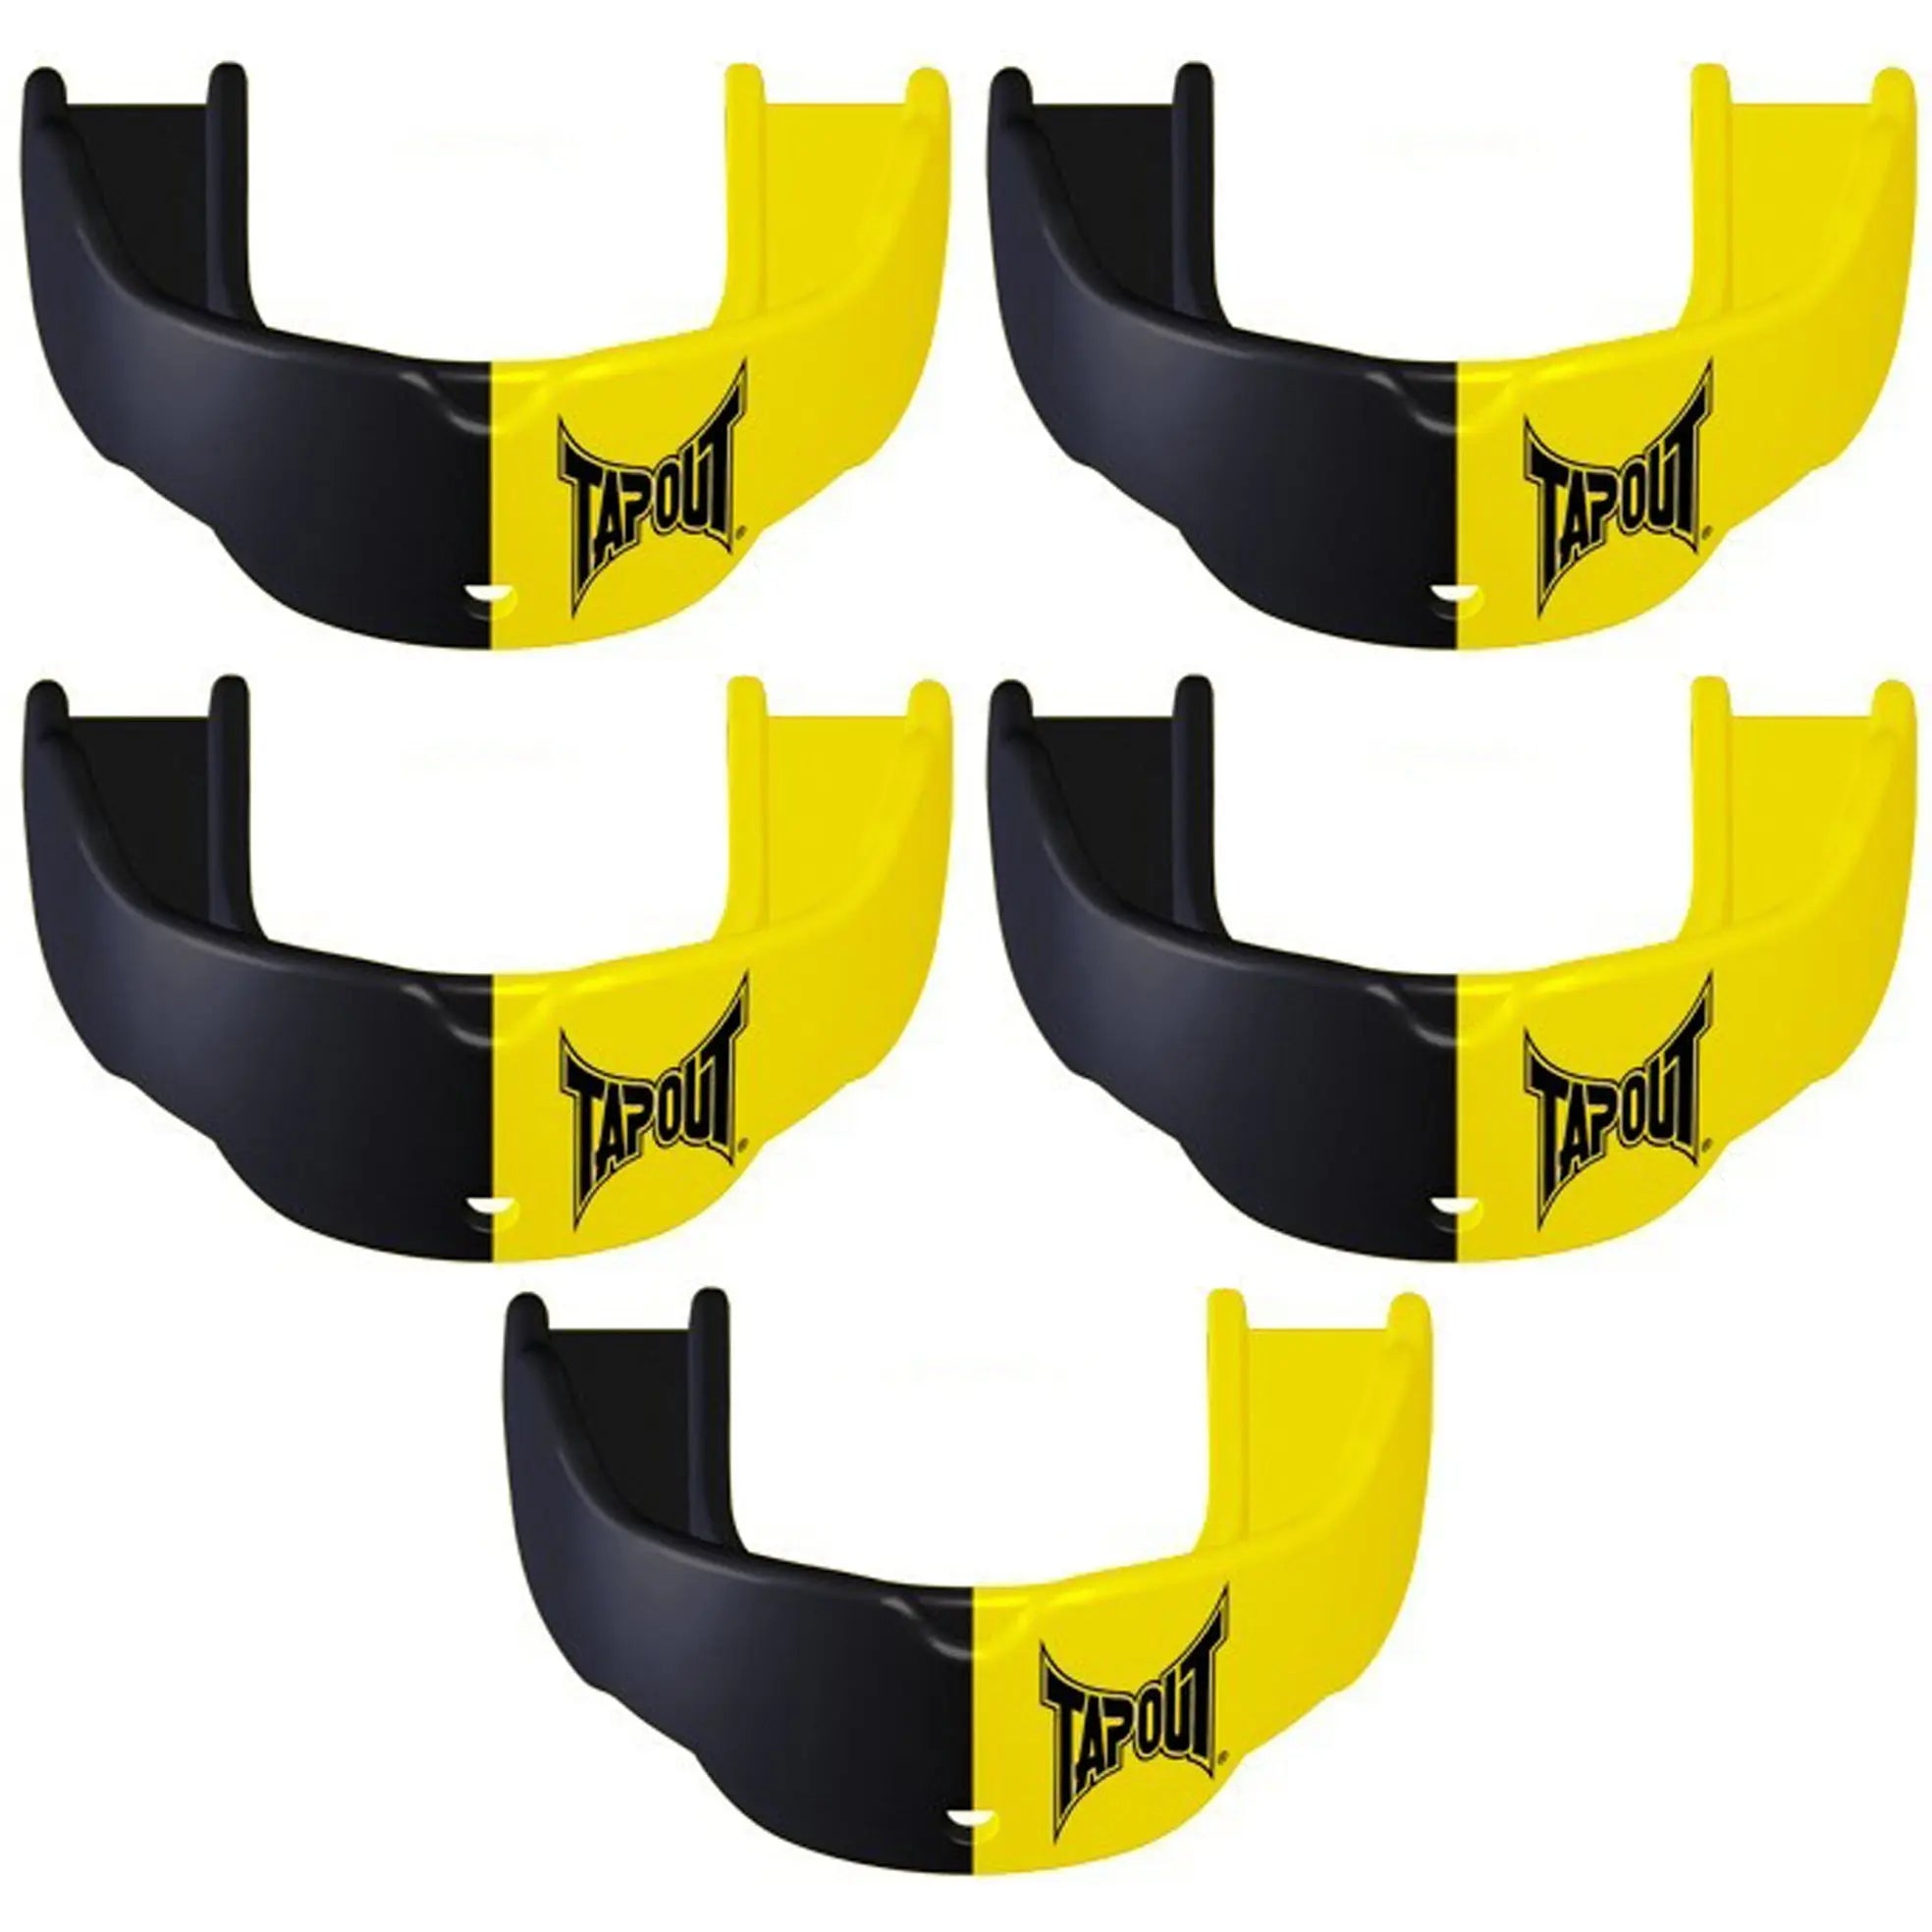 Tapout Youth Protective Sports Mouthguard with Strap 5-Pack - Yellow/Black Tapout